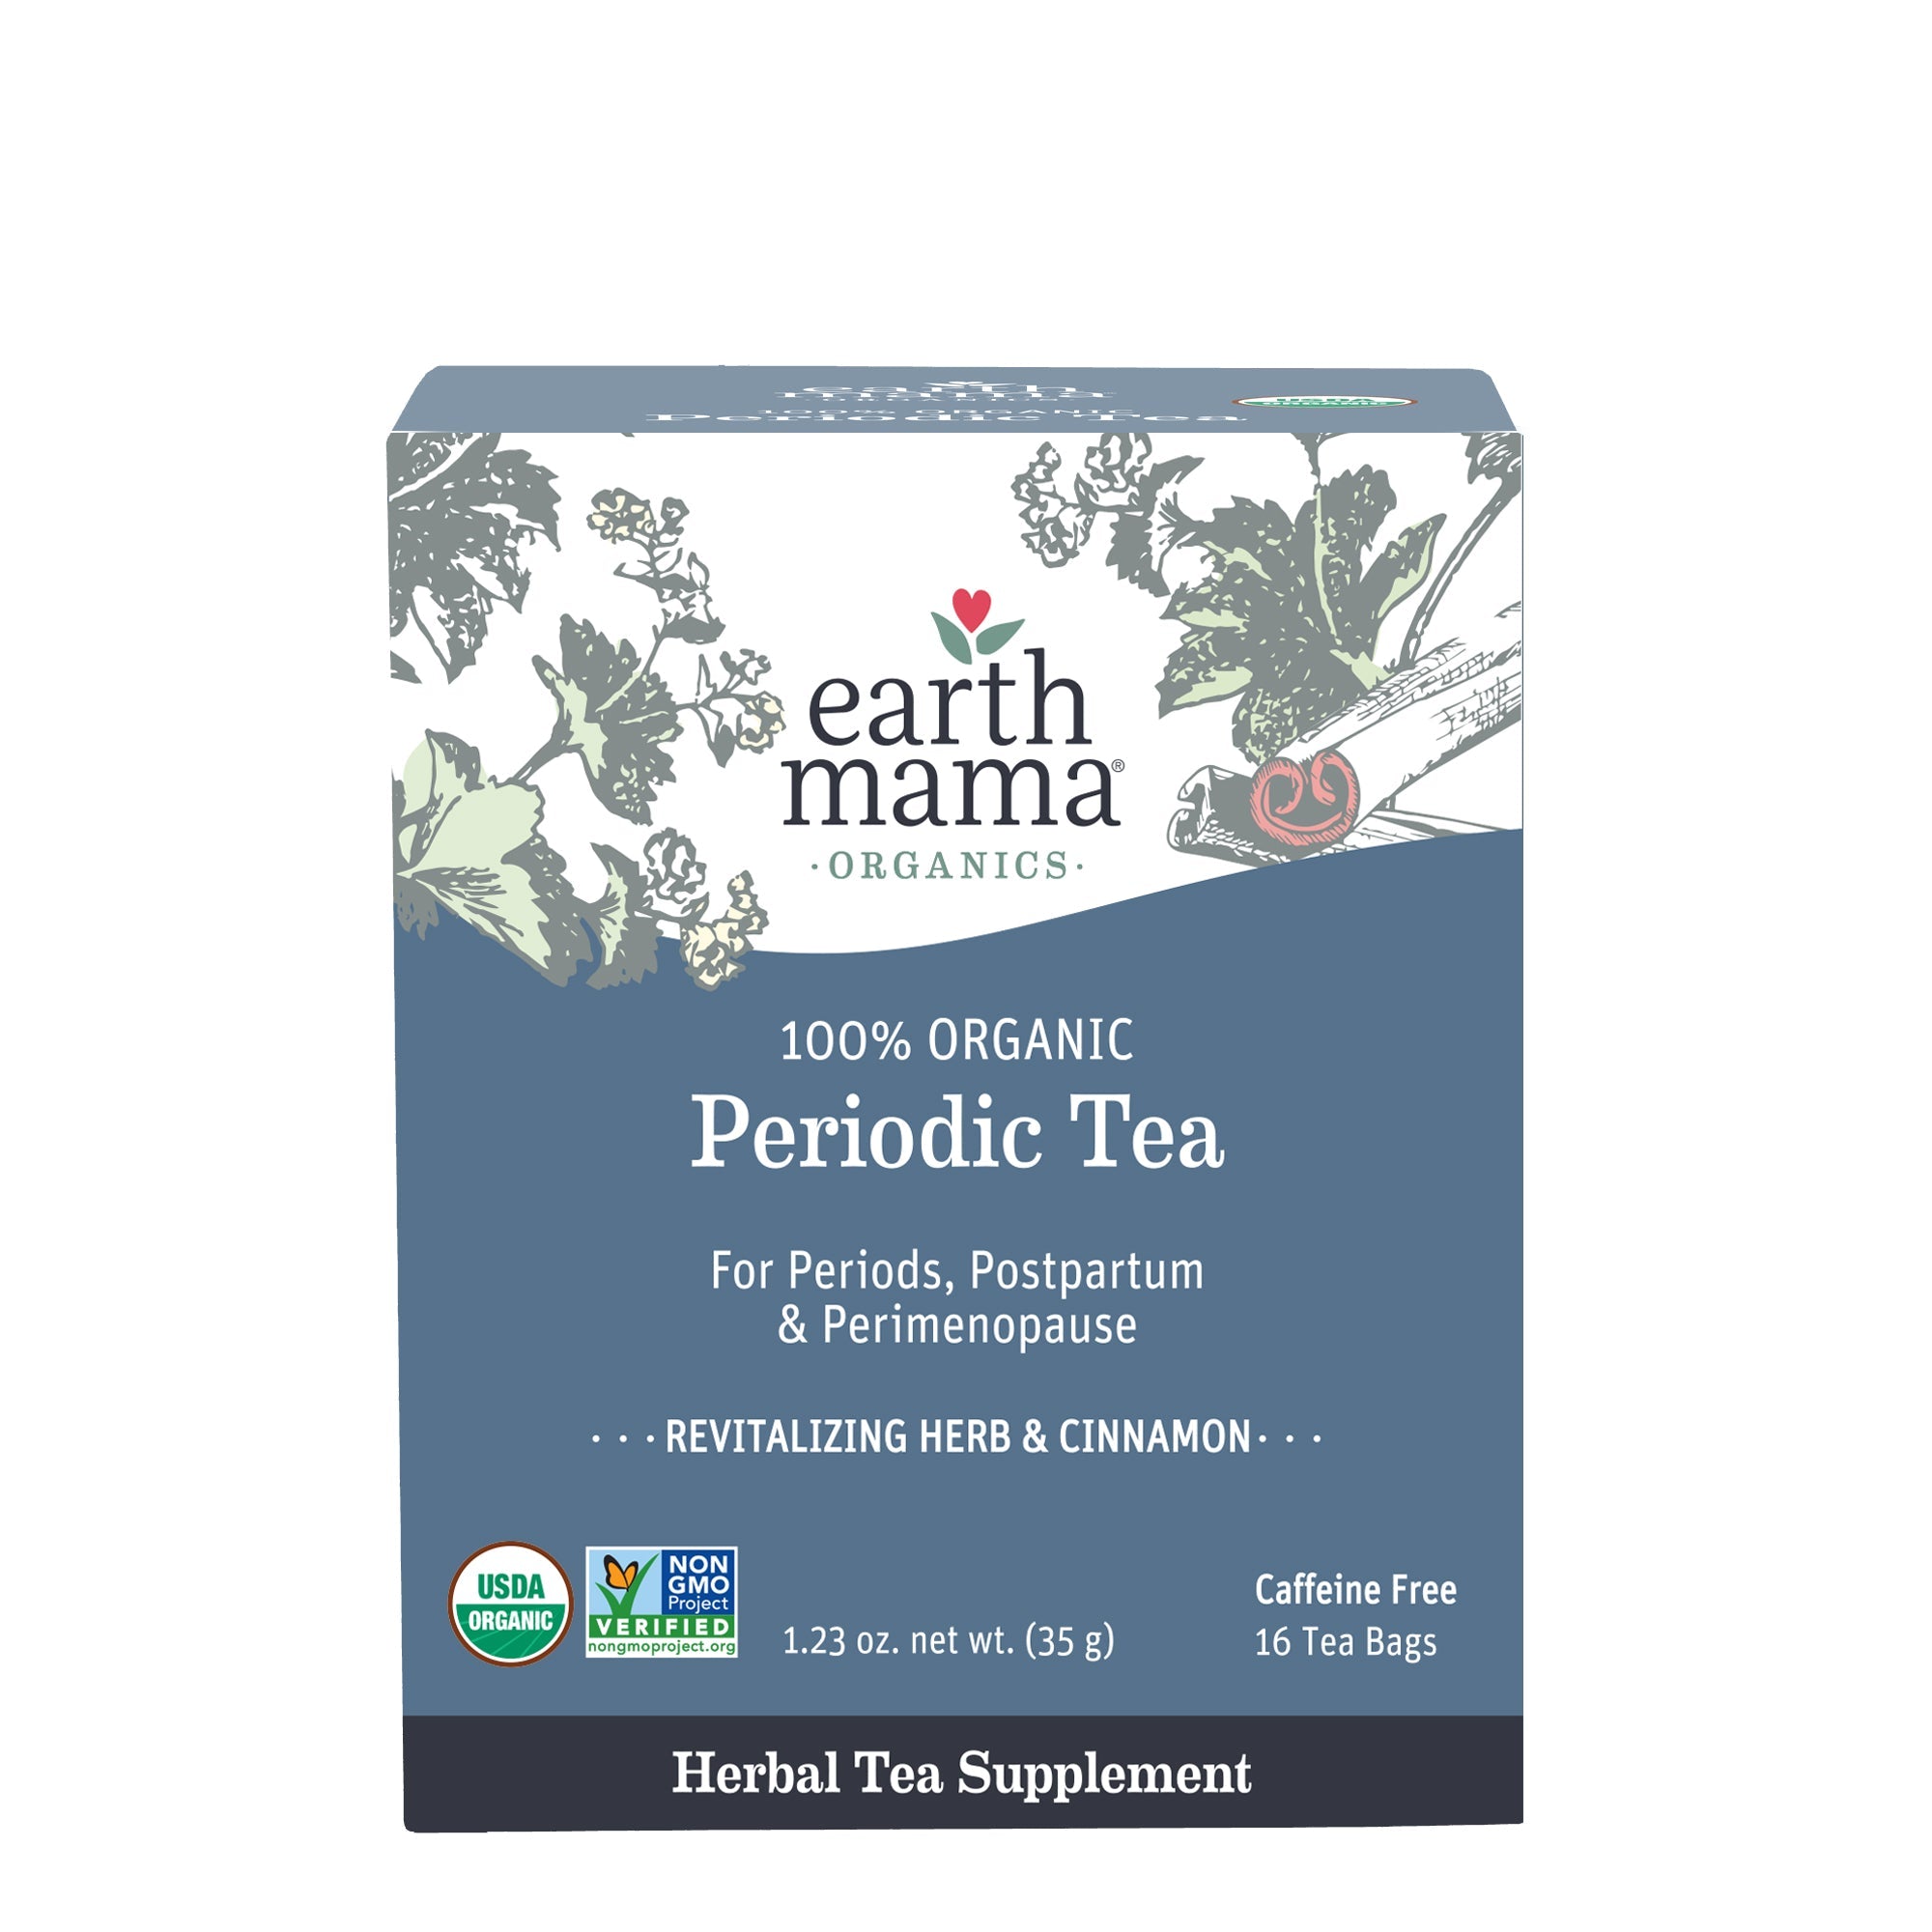 Ease PMS, periods & postpartum naturally! Organic Periodic Tea - cinnamon herbal blend for women. Caffeine-free, individually wrapped, breastfeeding-safe. Shop now!